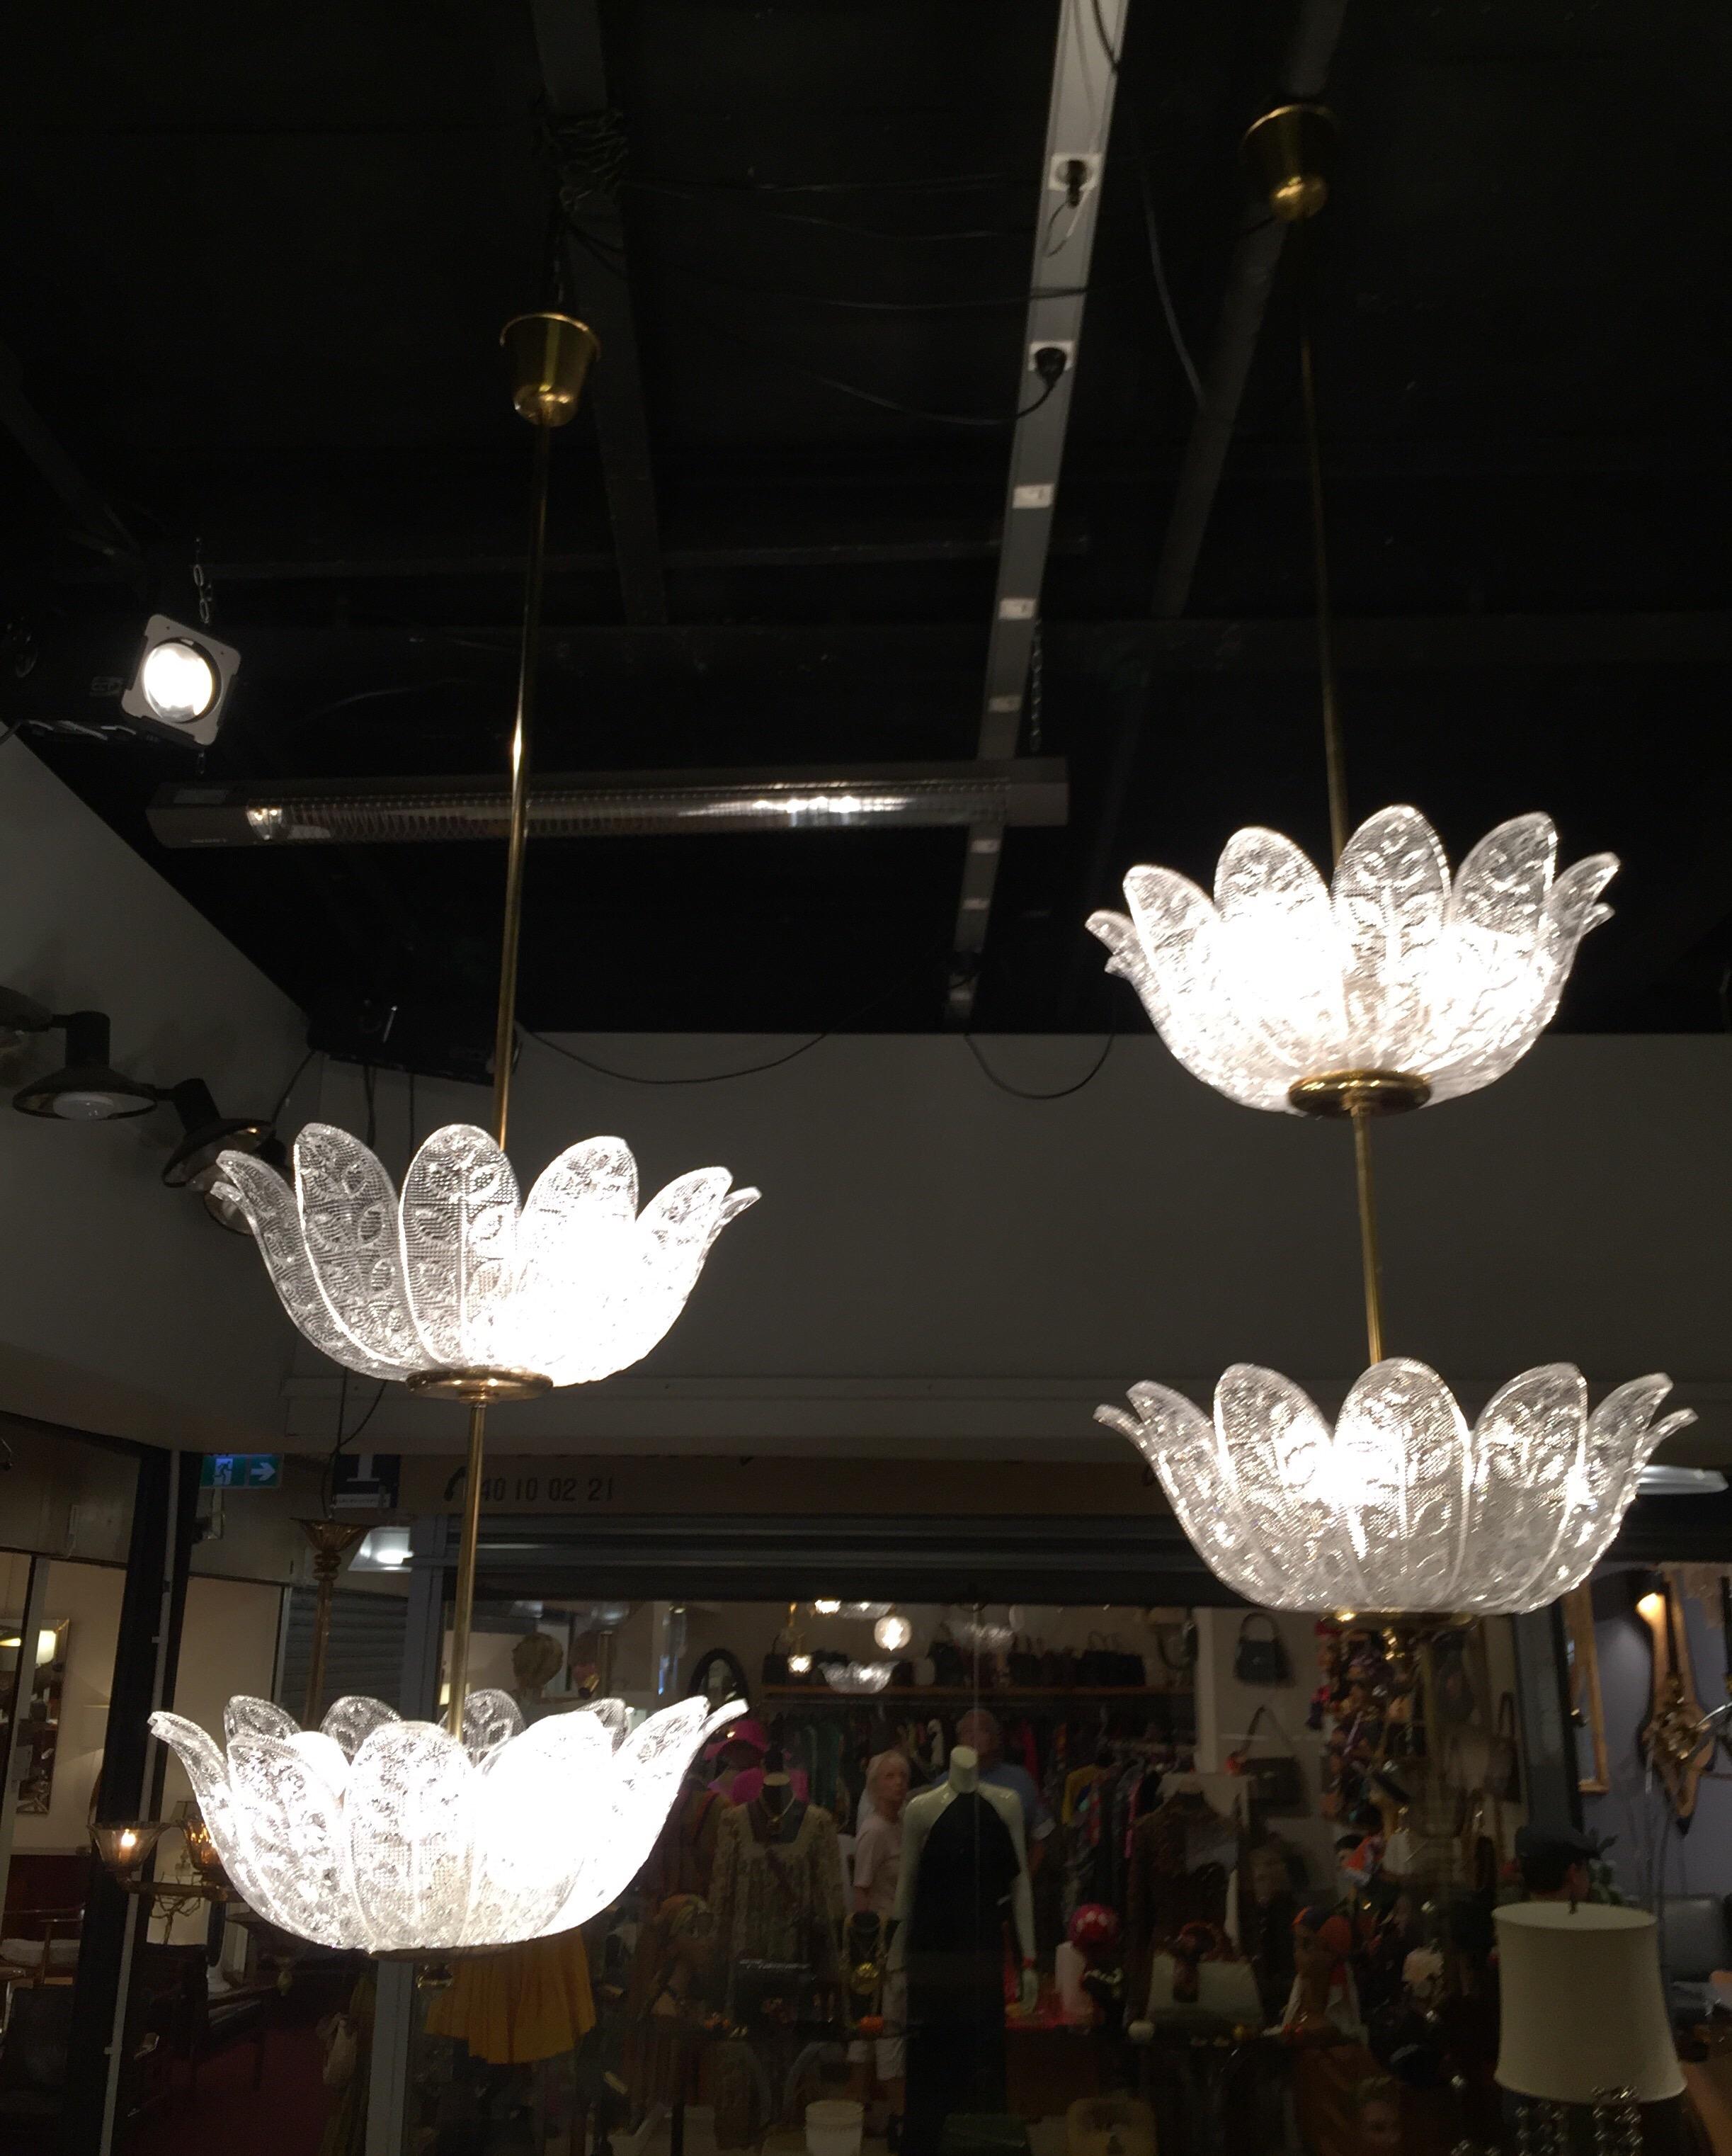 Sublime Scandinavian chandeliers made in crystal and brass, circa 1940-1950.
Flower decor.
Each cup is composed of 12 petals, or 24 petals per chandelier in total.
Both are in perfect condition.
Total height up to the bail: 150cm
Diameter of